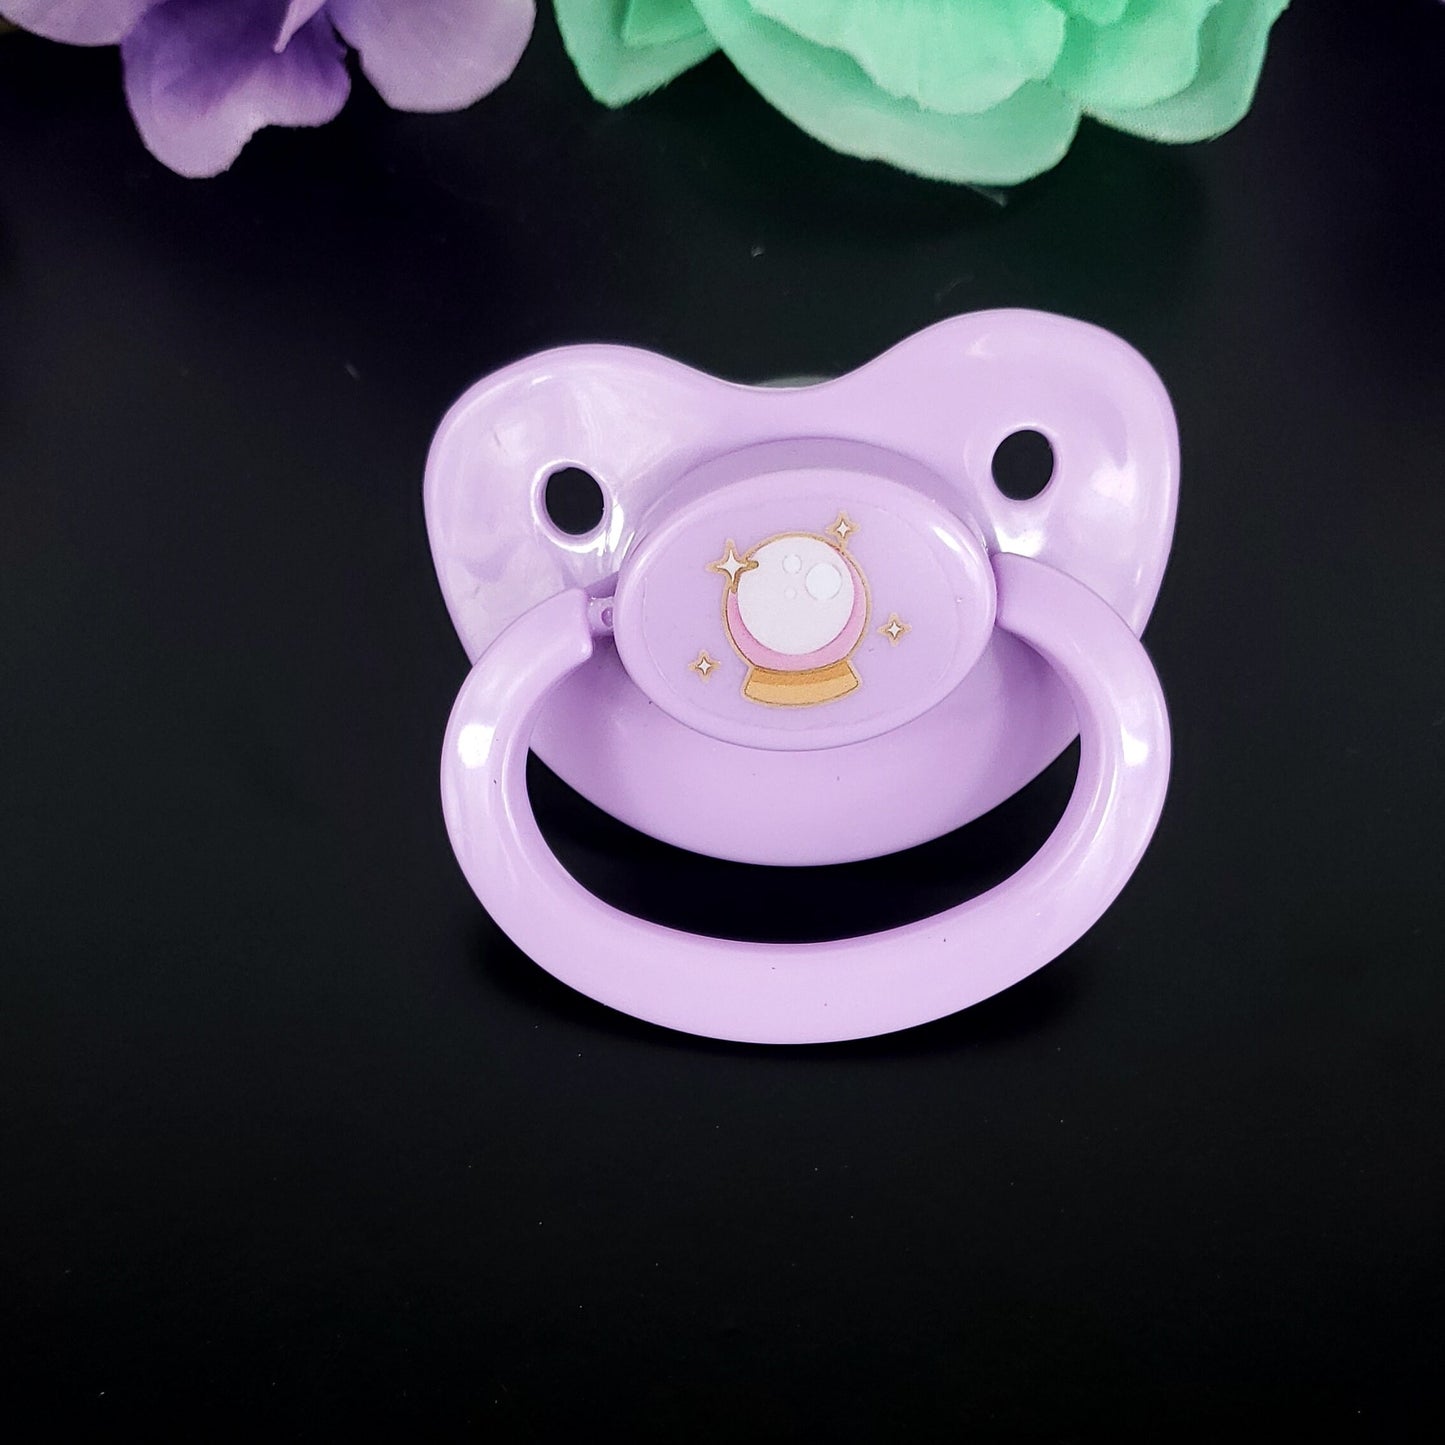 Crystal Ball Adult Pacifier